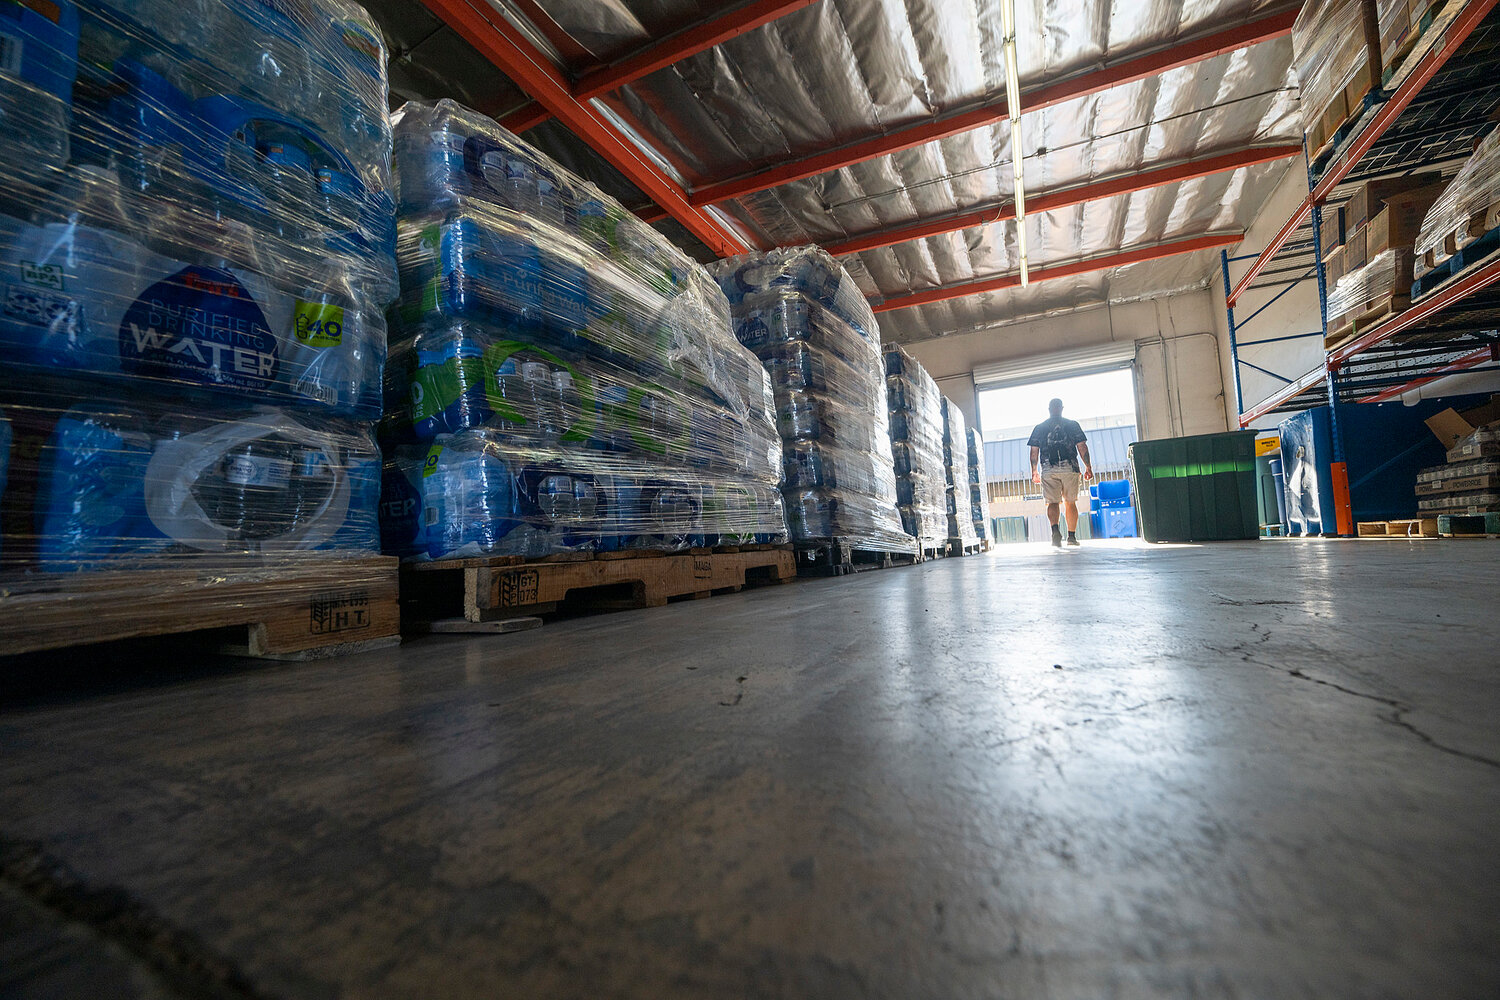 Phoenix Rescue Mission distributed 810,685 water bottles to those in need this summer.